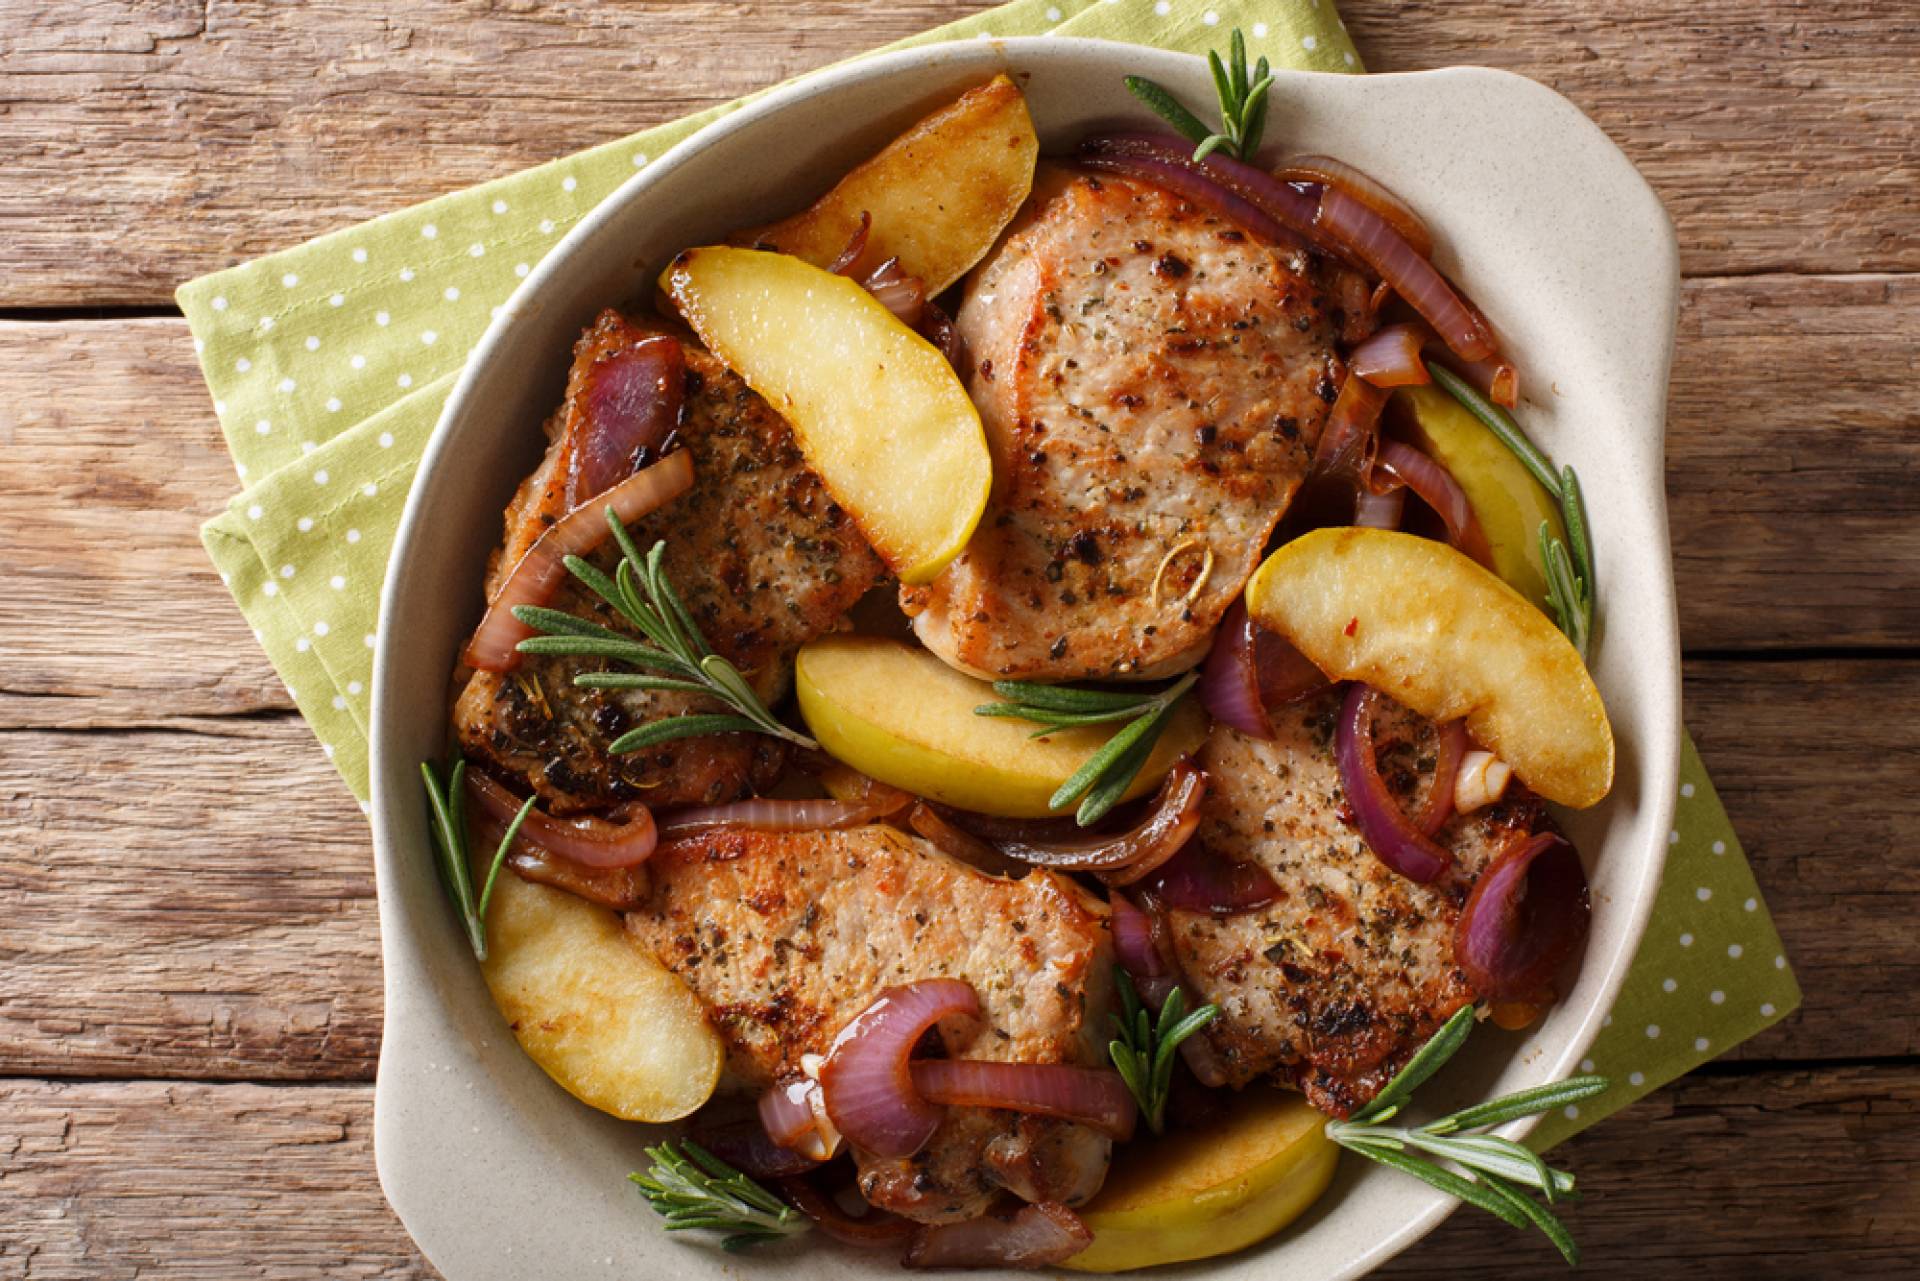 Grilled Pork Chops with Apples and Onions